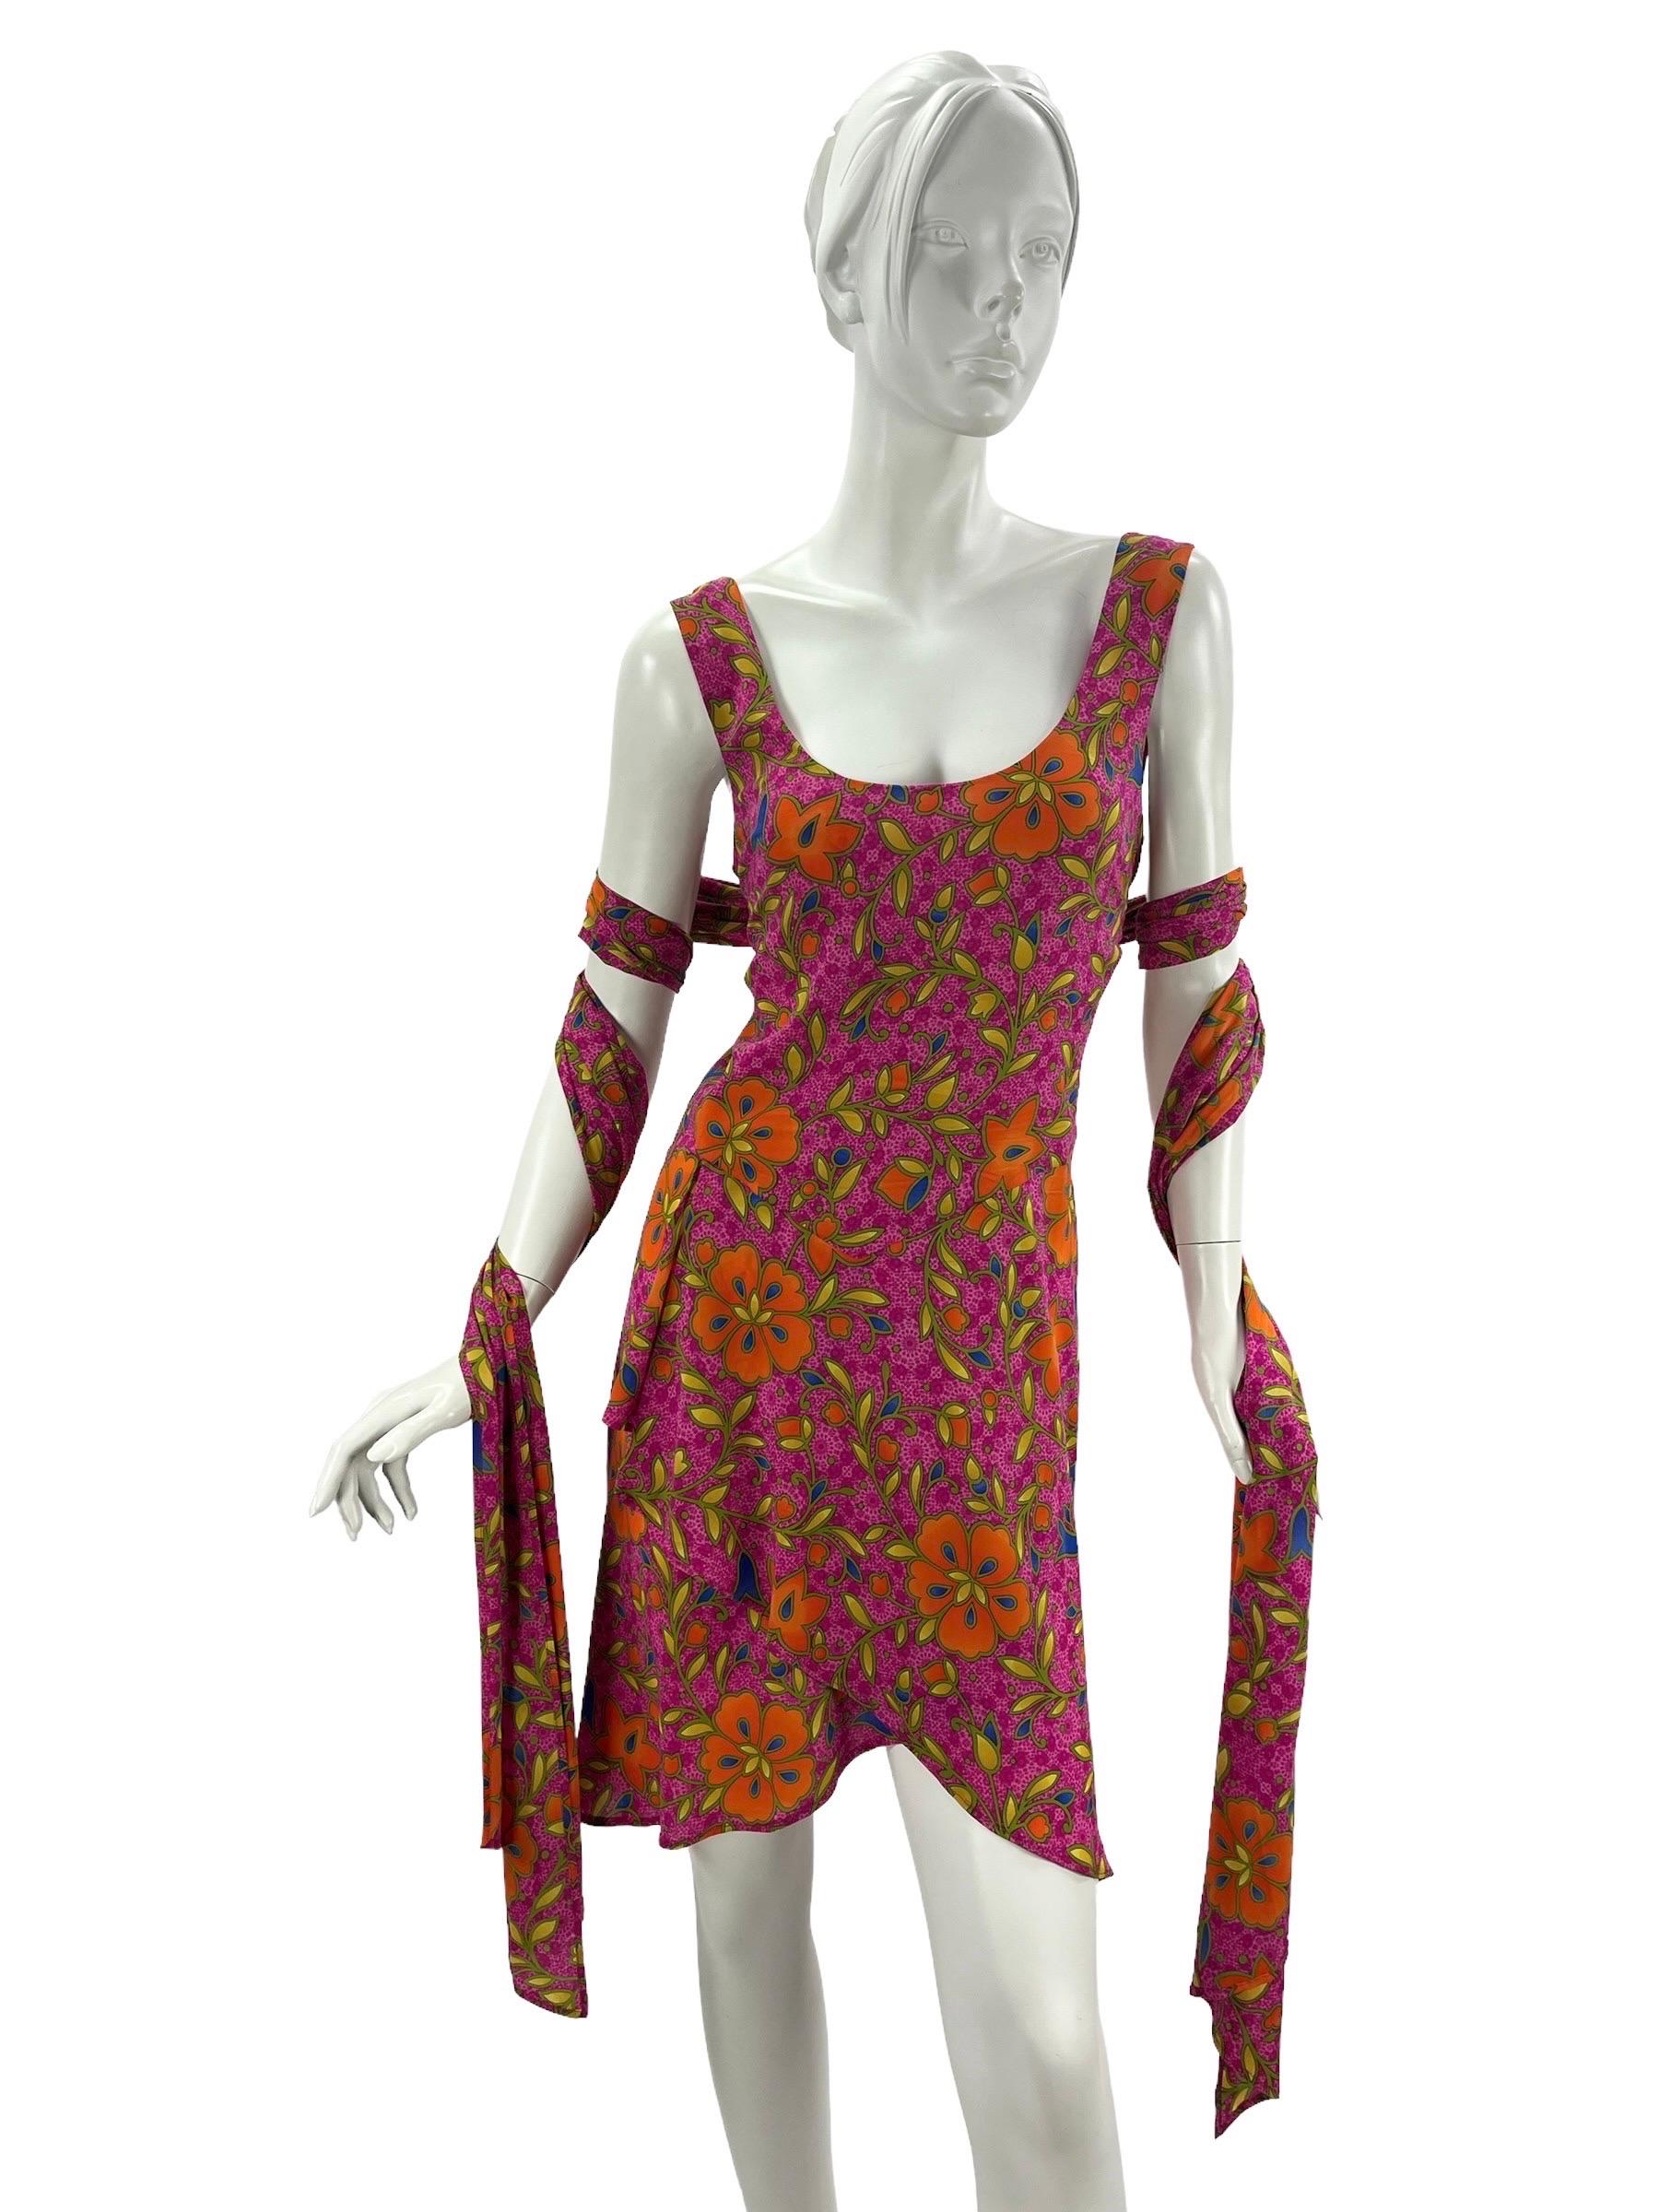 2001 Vintage Versace Floral Print Hot Pink Dress 
Italian size 42  - US 6 
Finished with long scarf which lets you play and adjust it according to your mood. Wrap style skirt. Fully lined.
Measurements: Bust 32